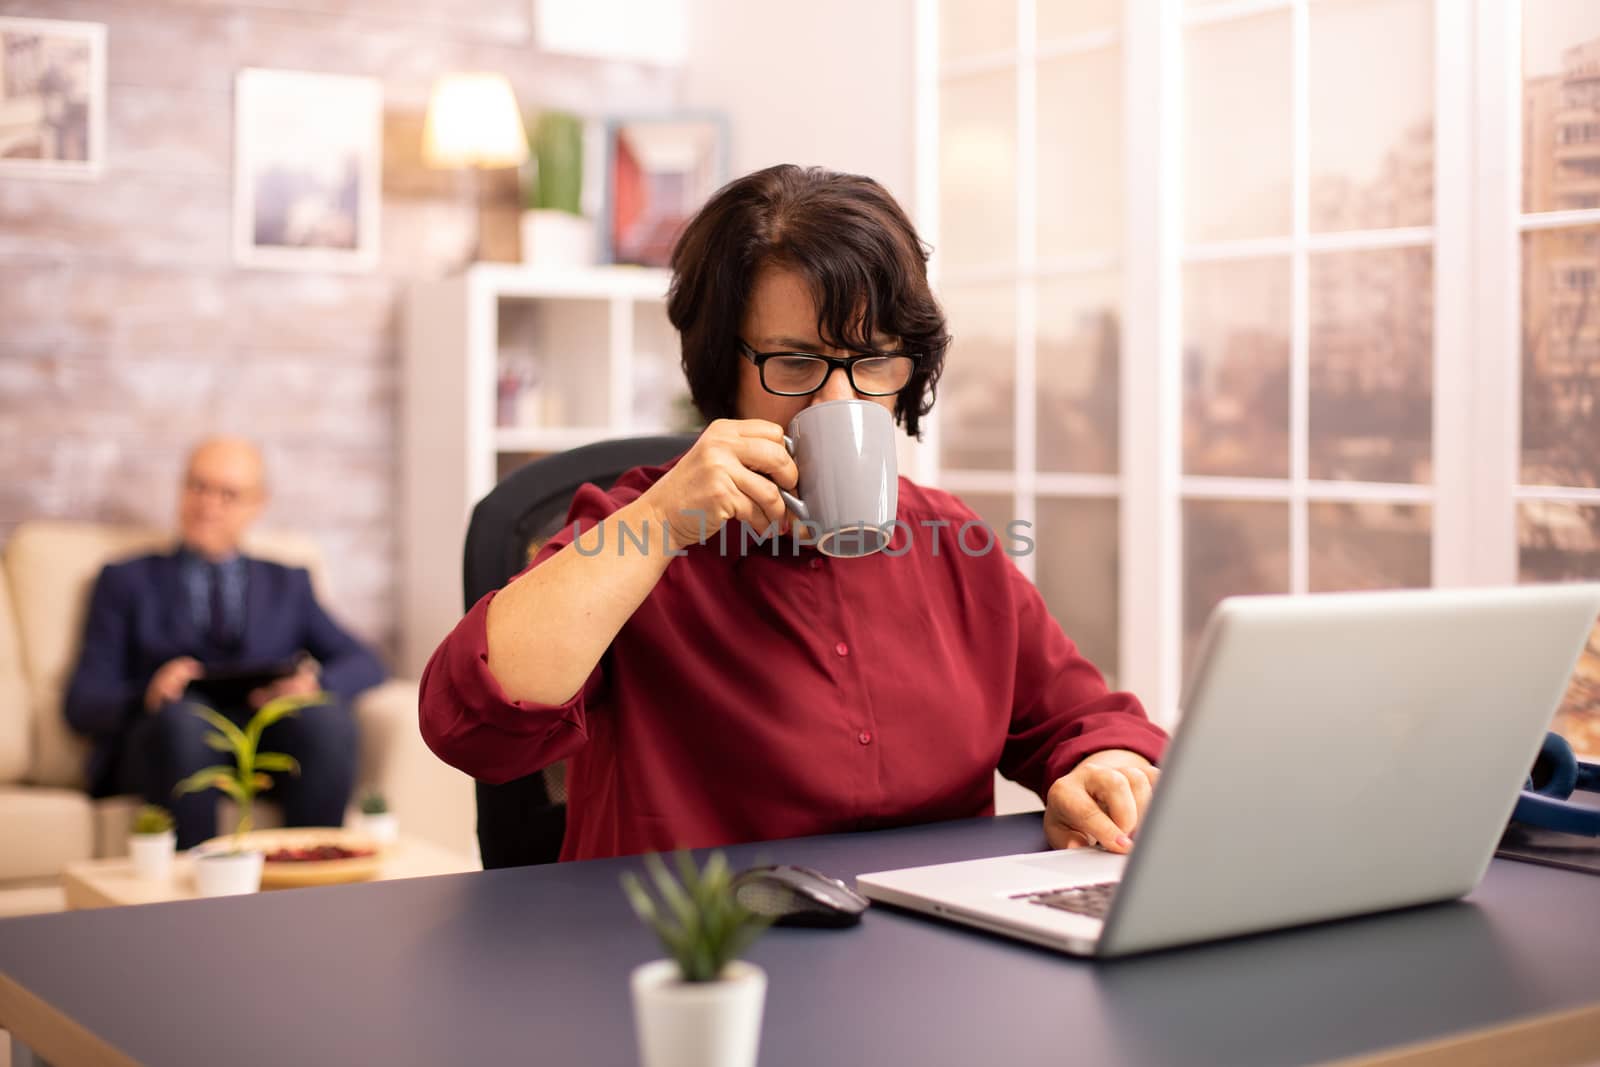 Elderly lady sipss from coffee while working on a modern laptop in cozy living space